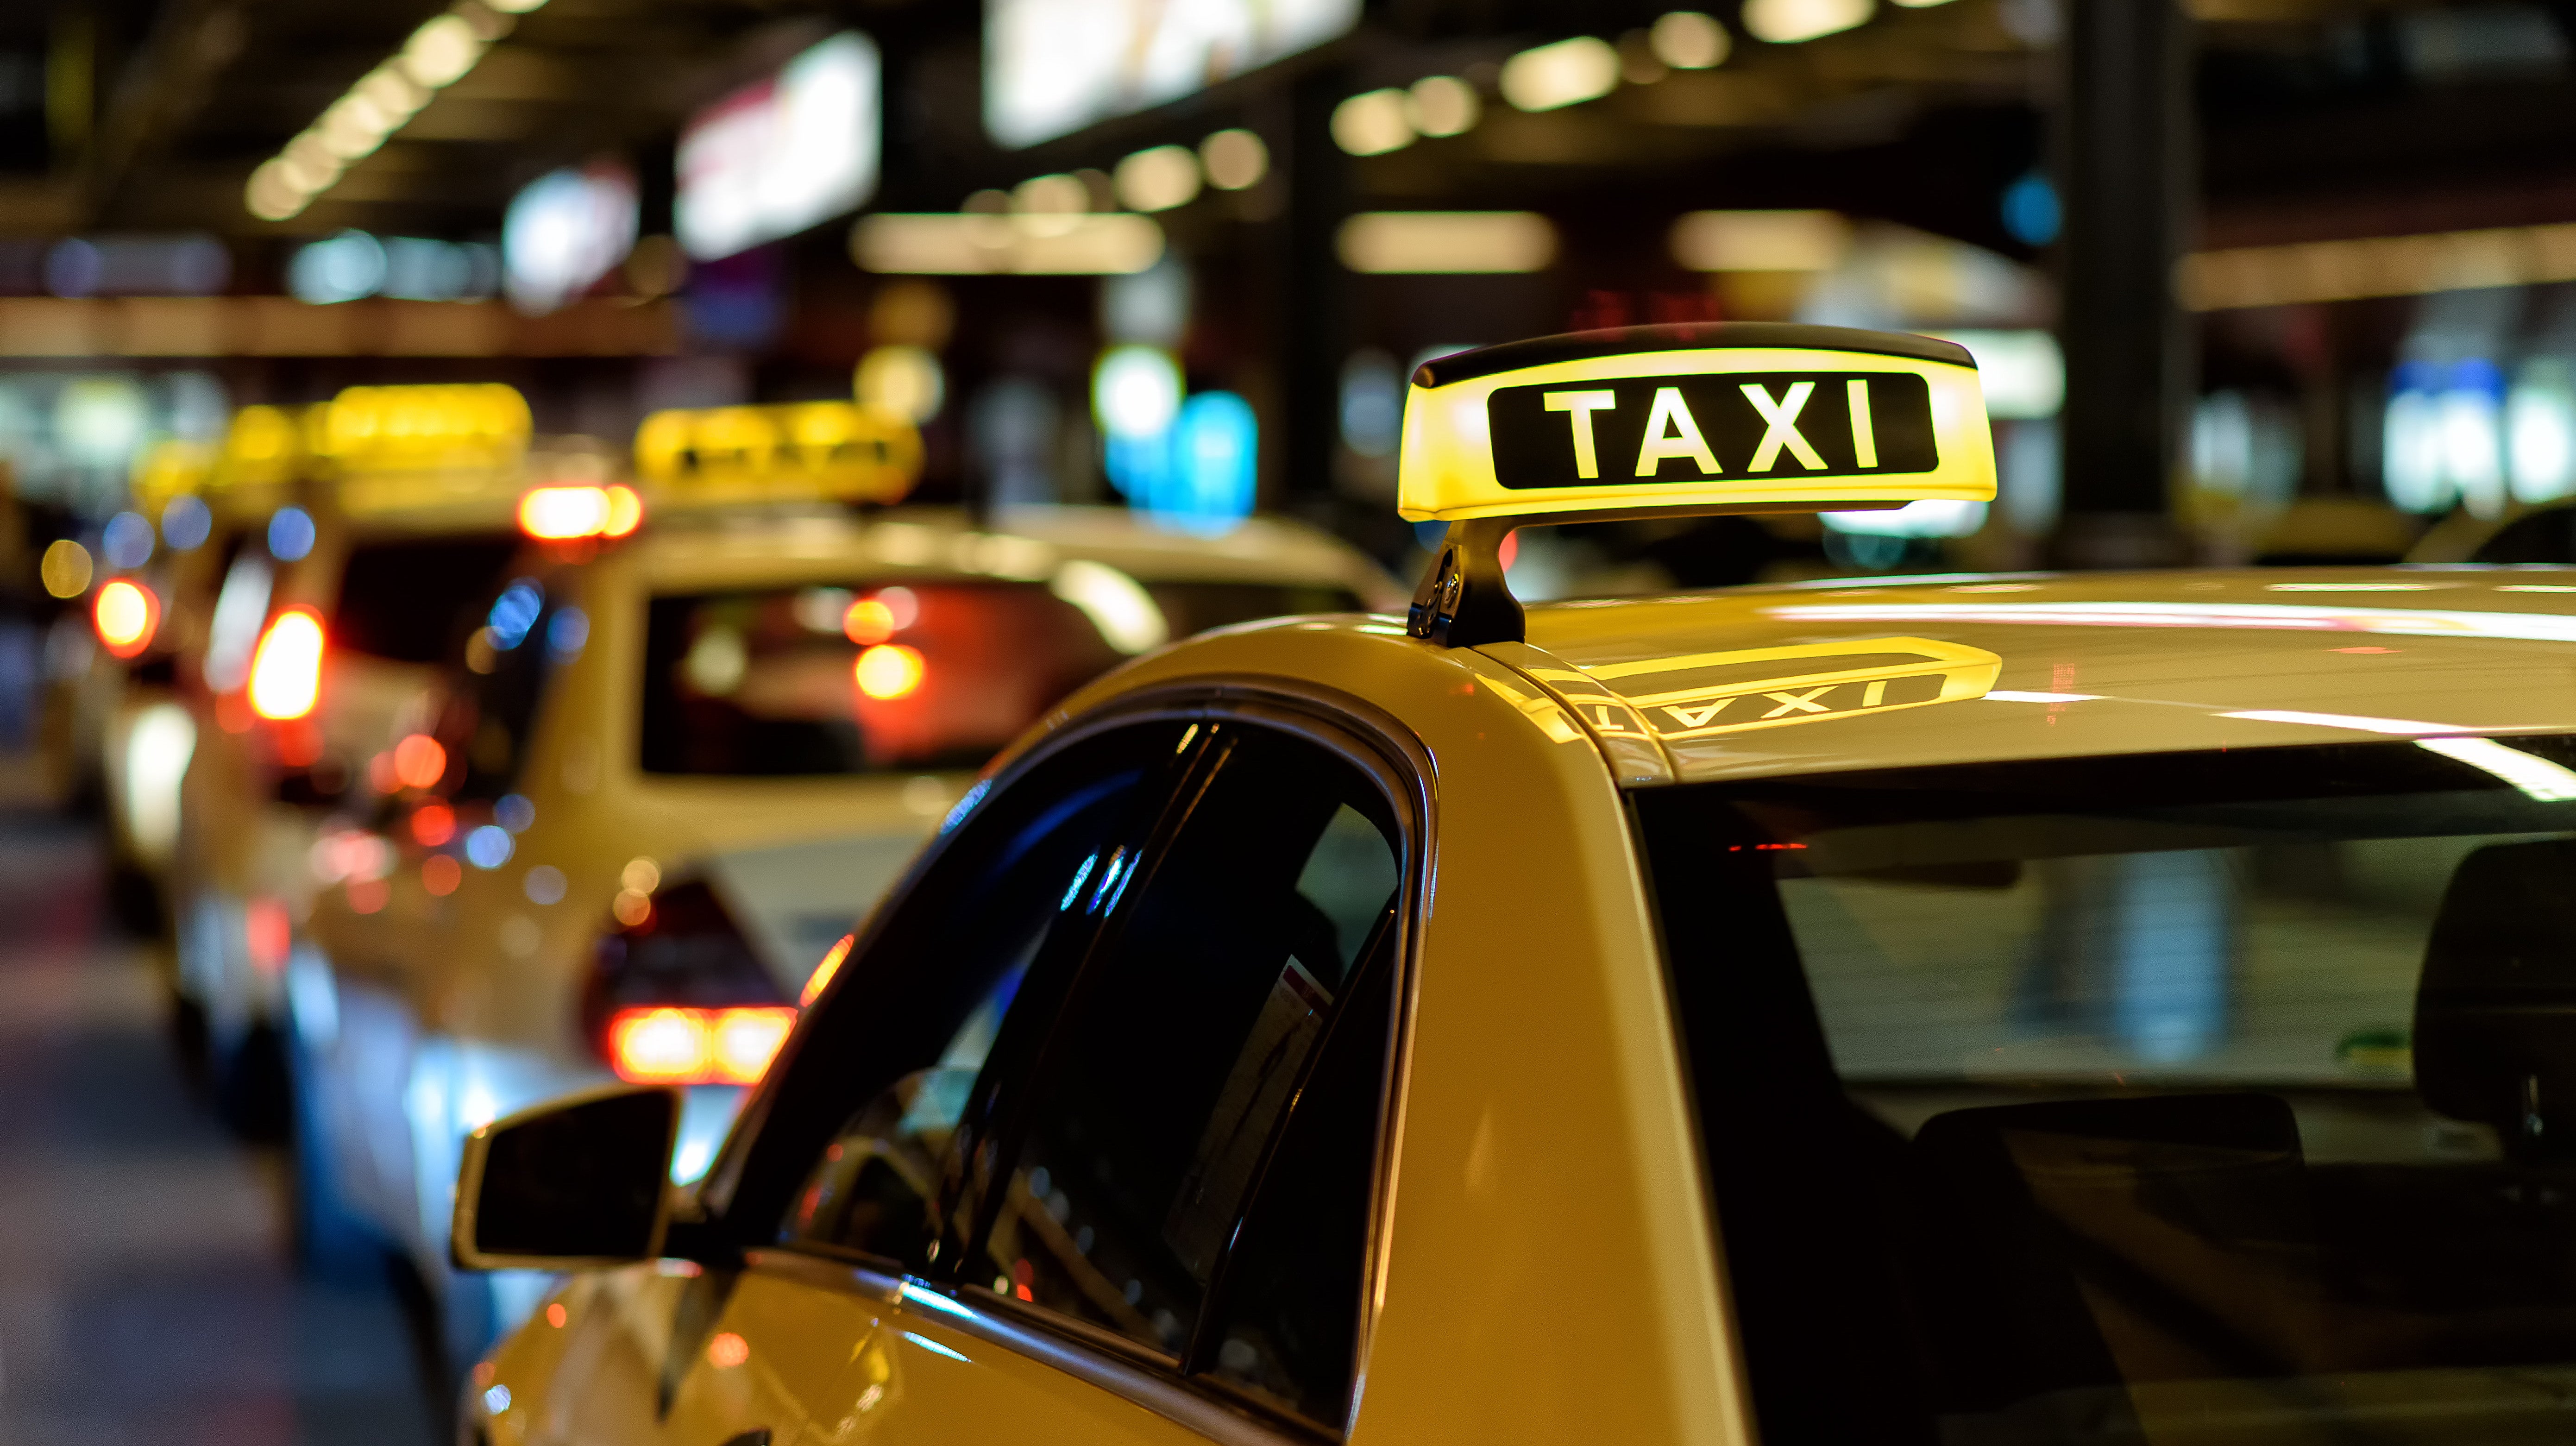 Check Airport Taxi And Ride Share Cost Estimates Before A Trip